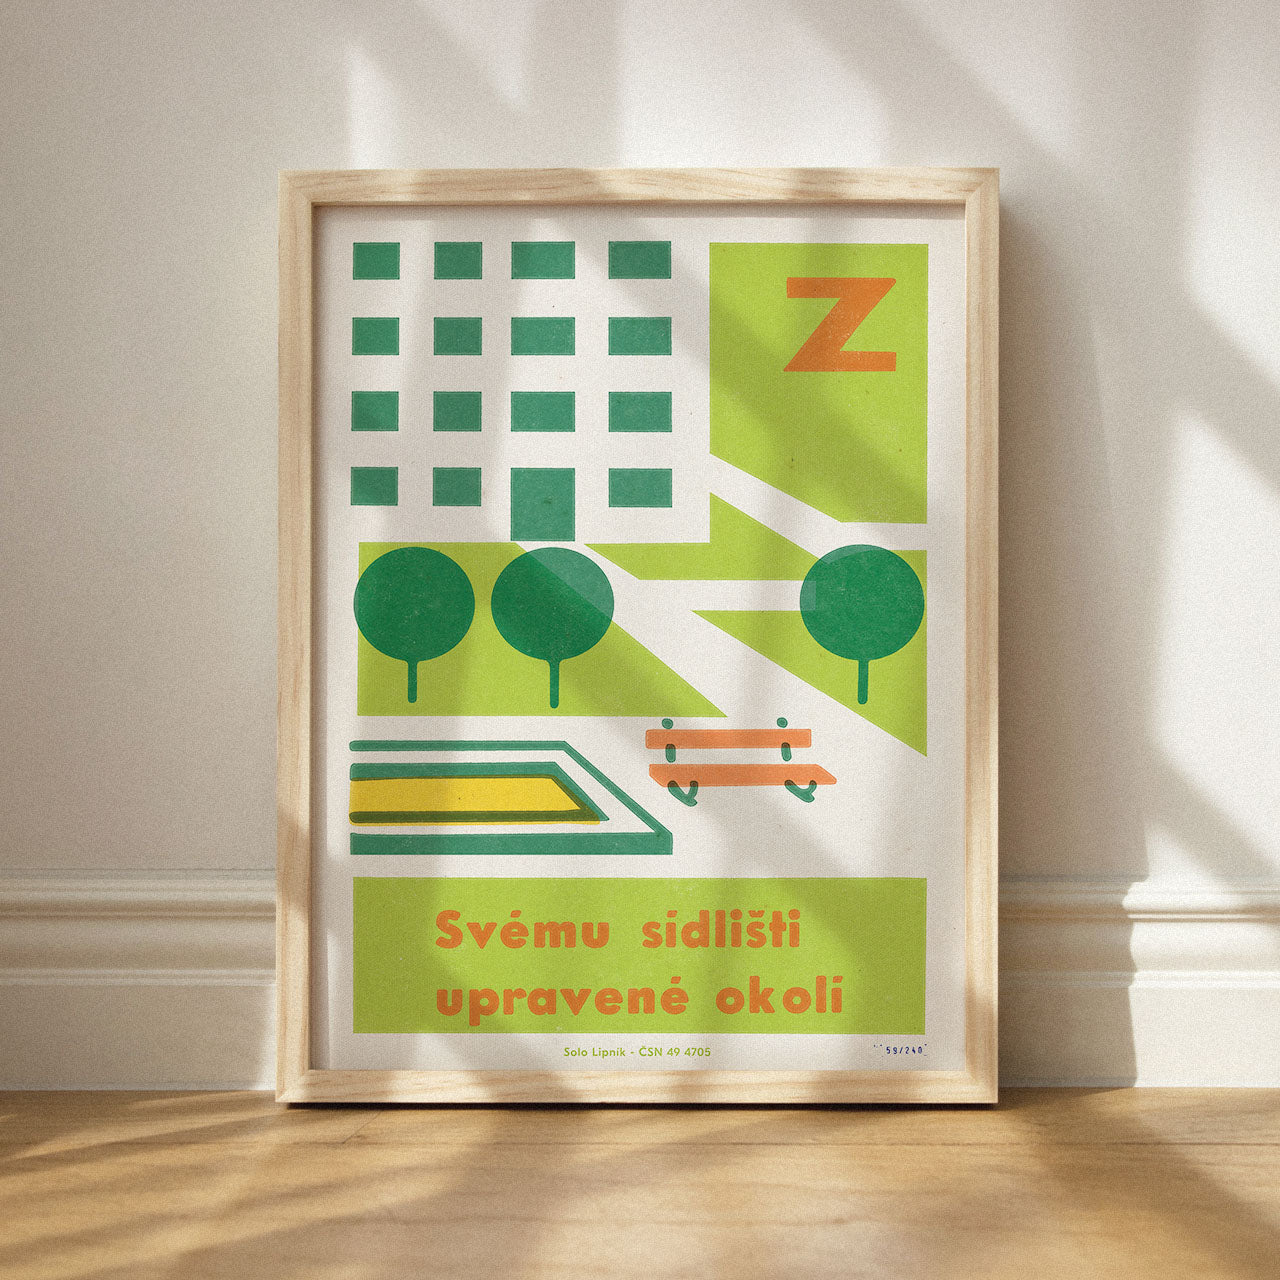 To your housing estate landscaped surroundings - Poster 30x40 cm 